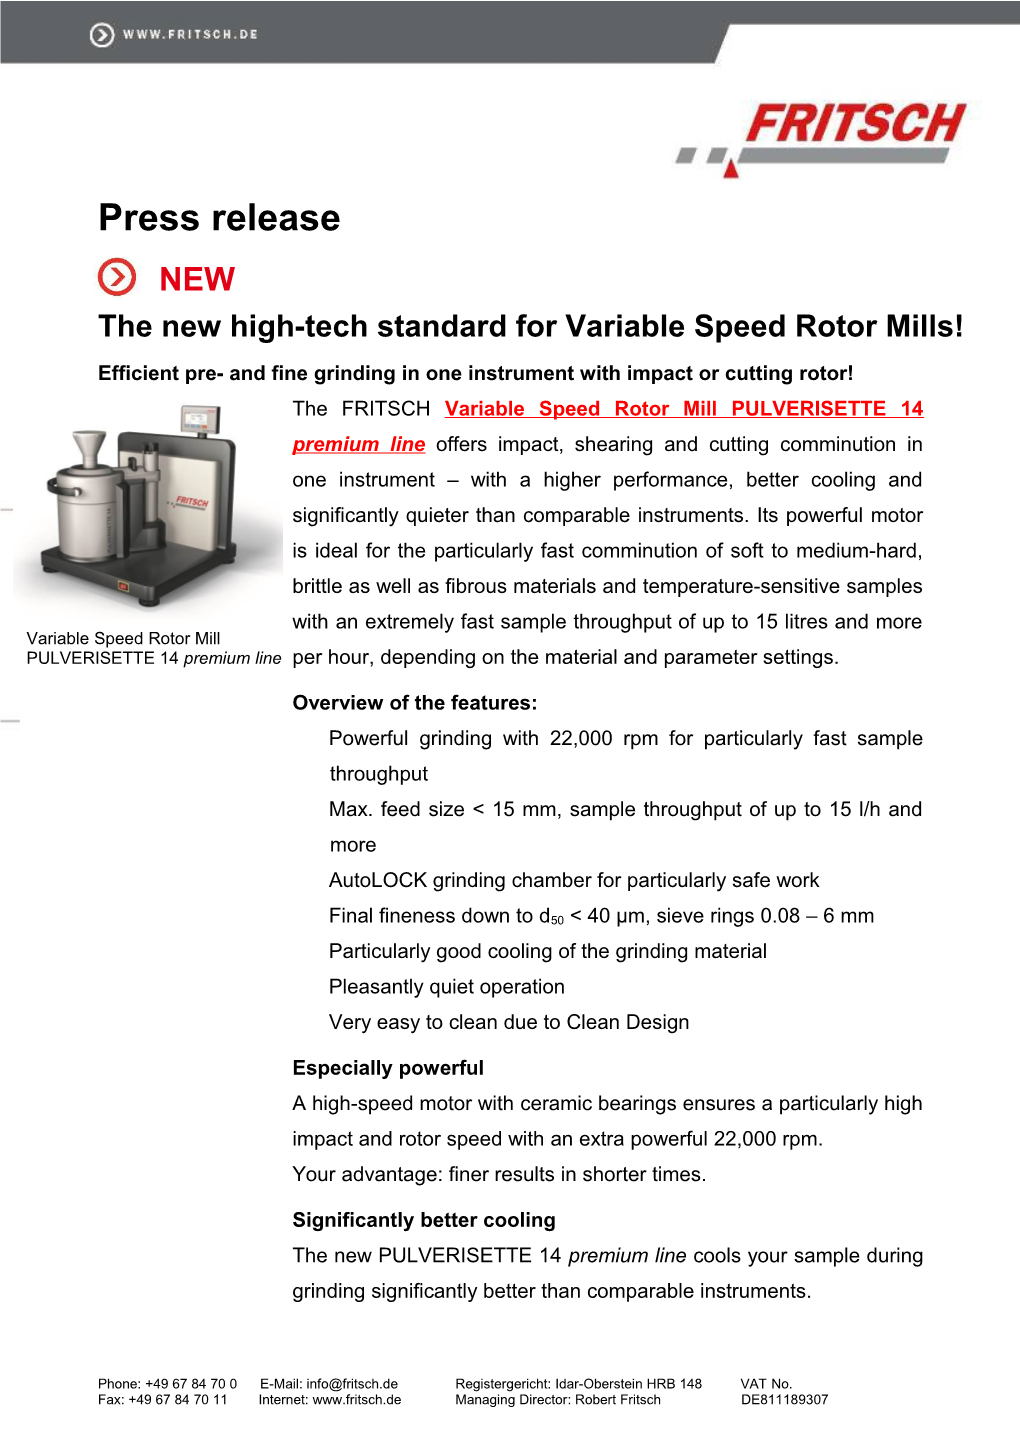 The New High-Tech Standard for Variable Speed Rotor Mills!